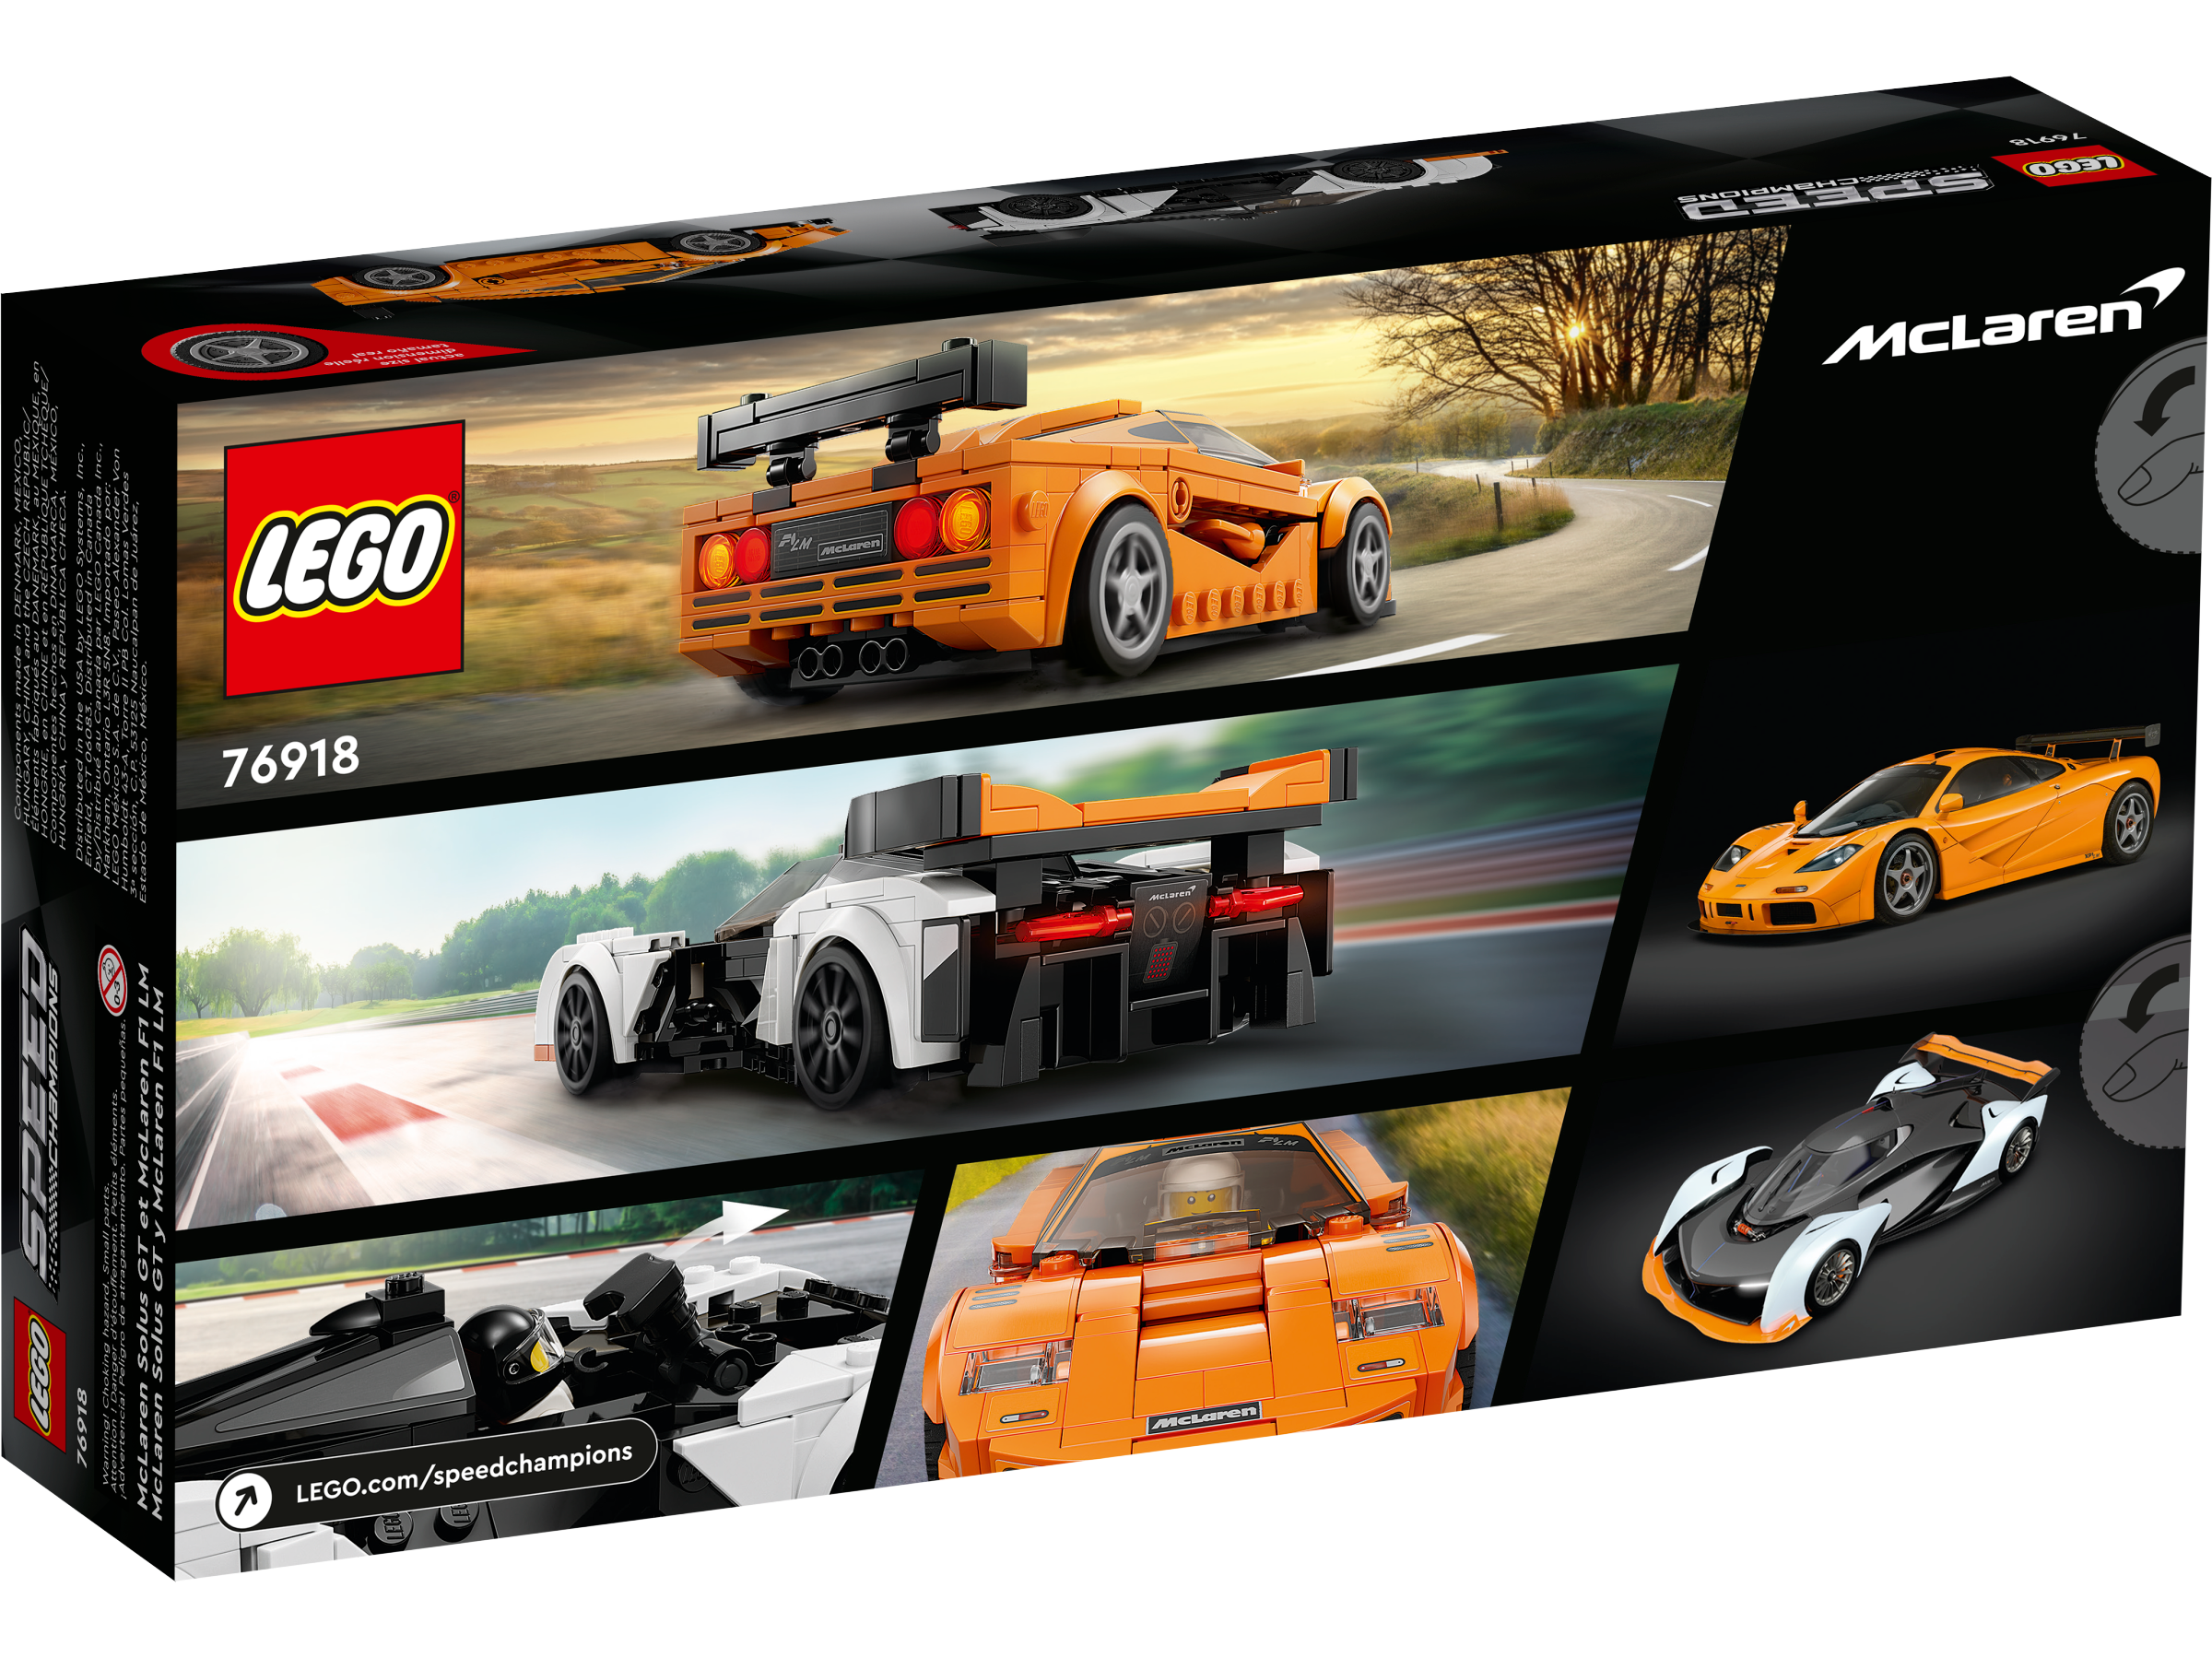 LEGO Speed Champions McLaren Solus GT & McLaren F1 LM 76918, Featuring 2  Iconic Race Car Toys, Hypercar Model Building Kit, Collectible 2023 Set